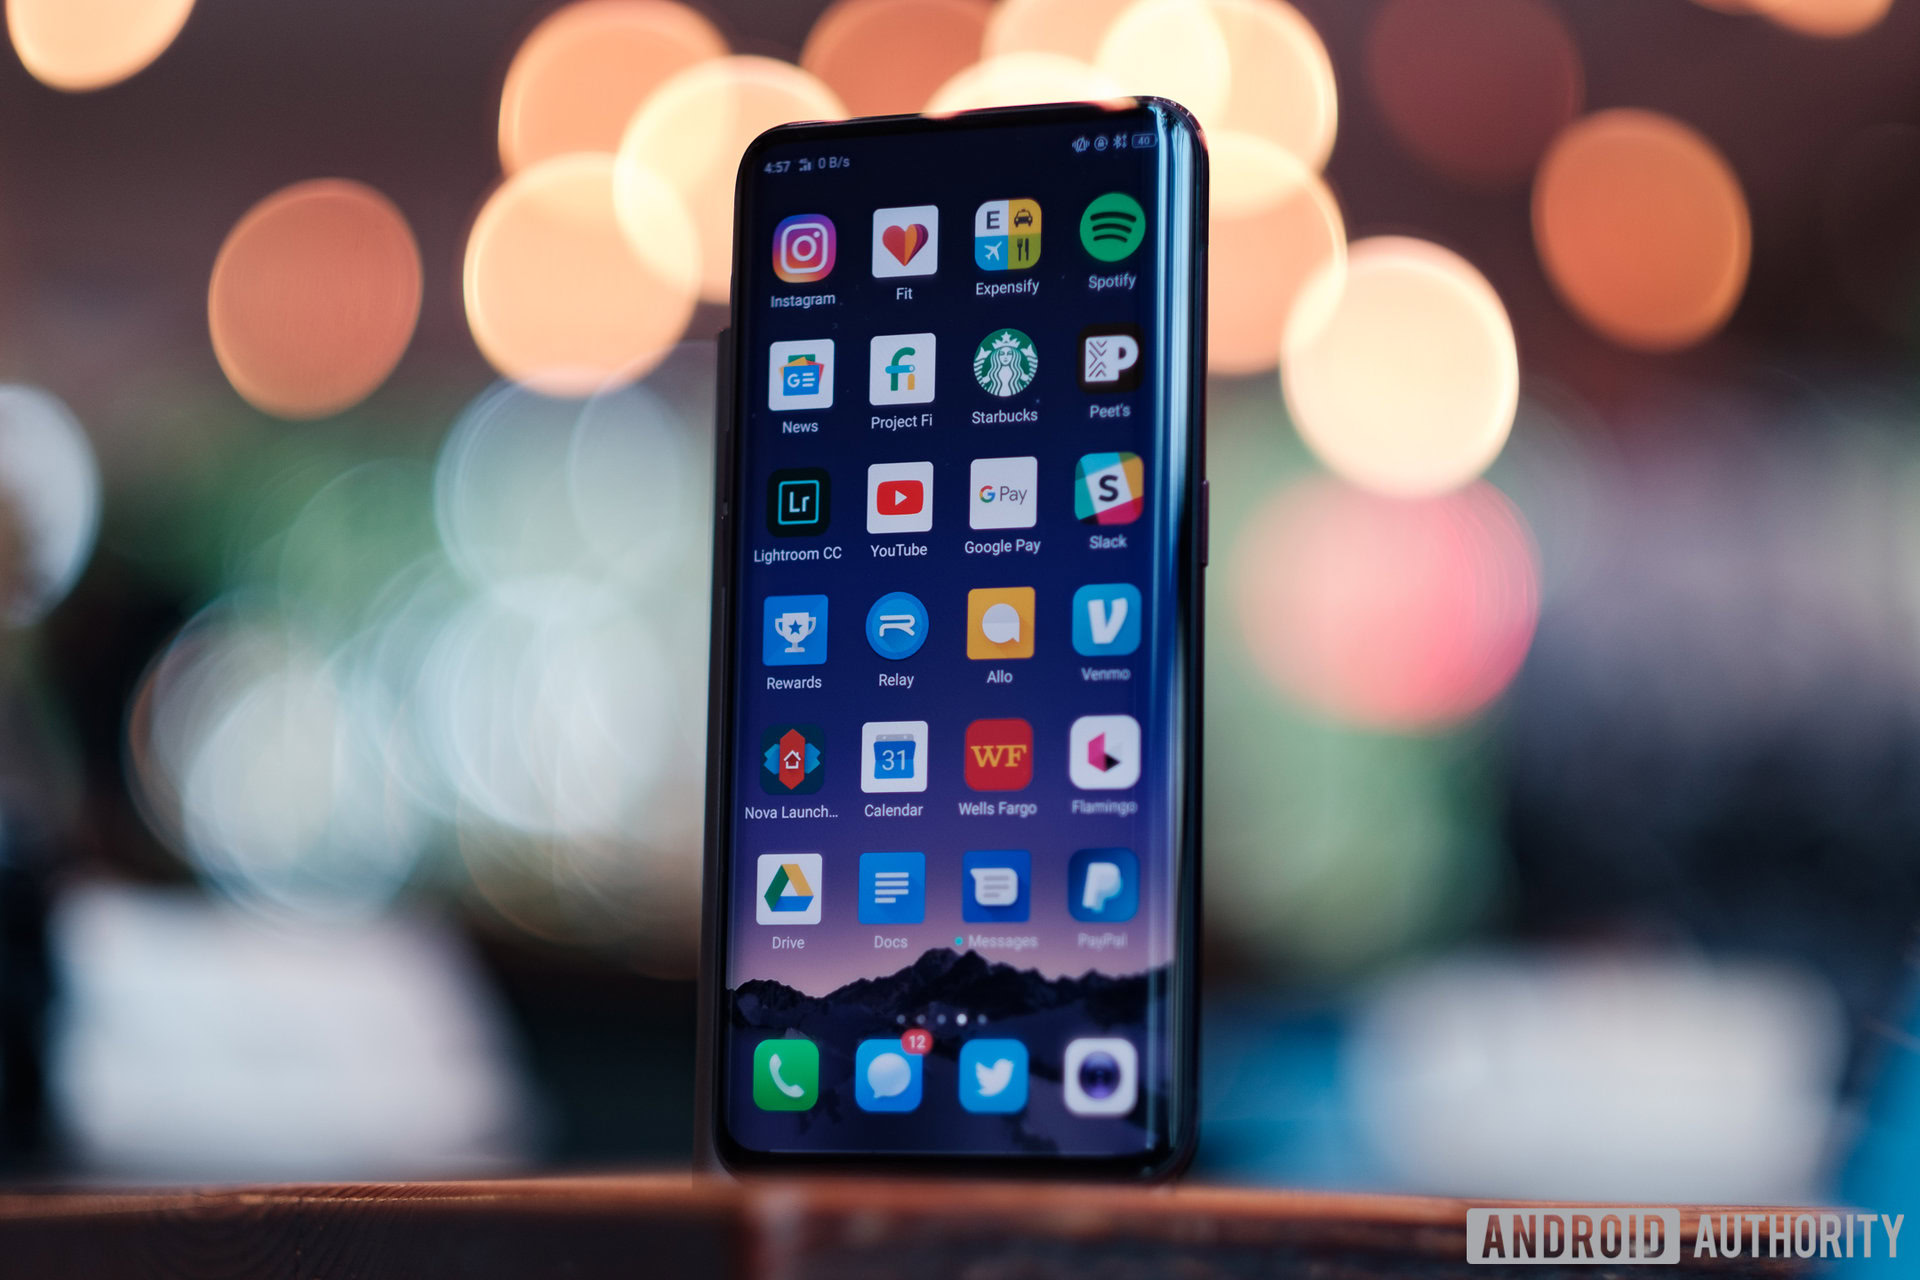 Oppo Find X review: The all-screen phone of the future is finally here